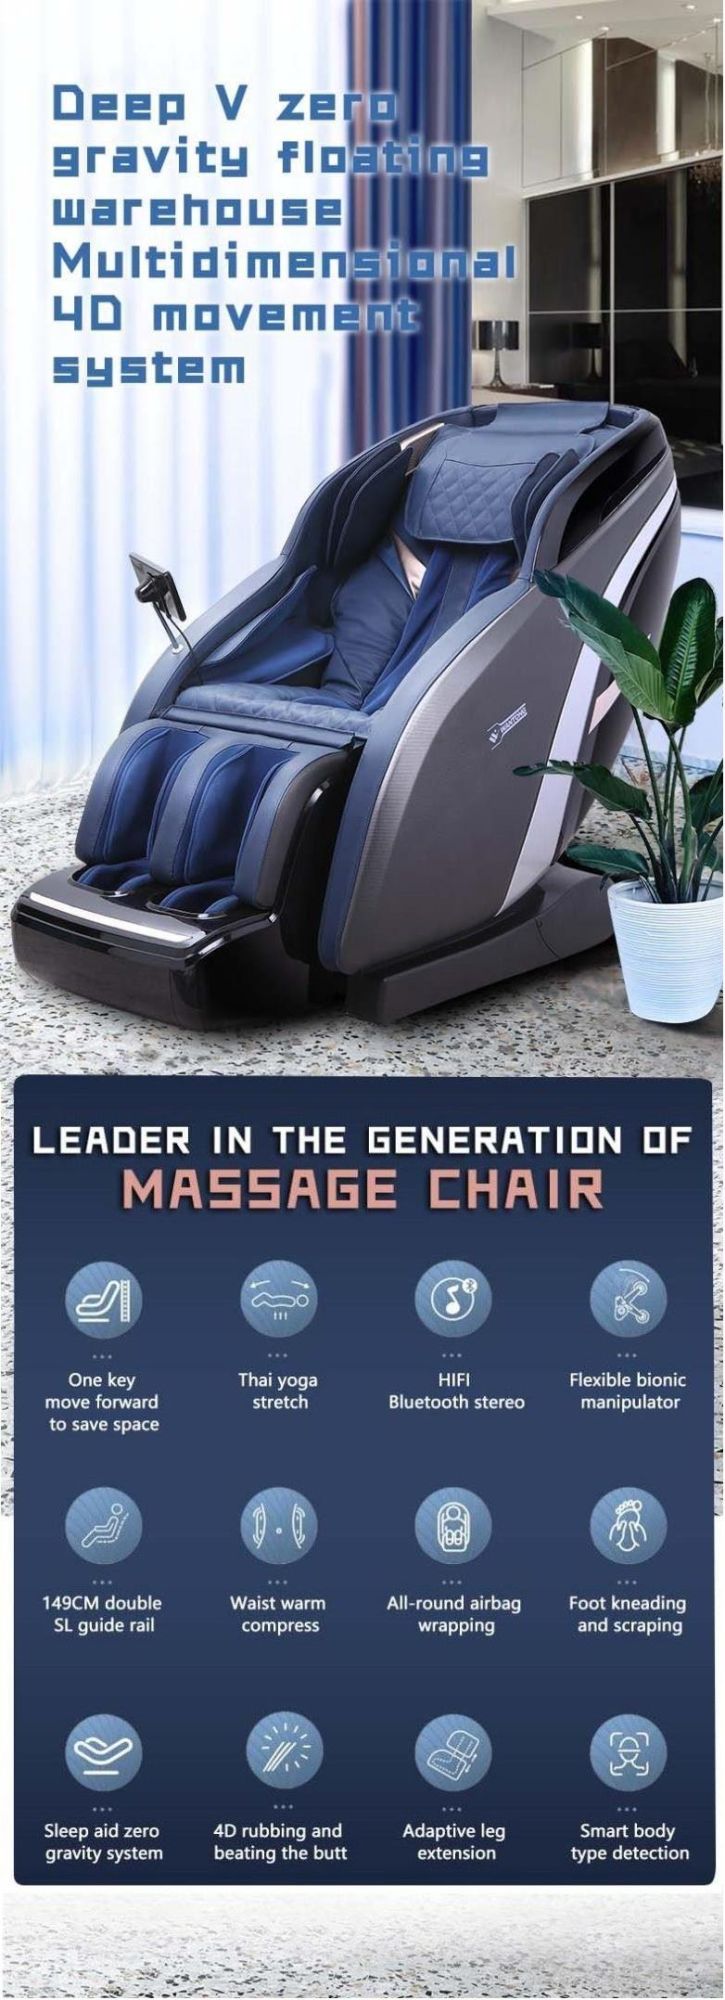 Electric Whole Body Heating One-Button Multifunctional Recliner Massage Chair